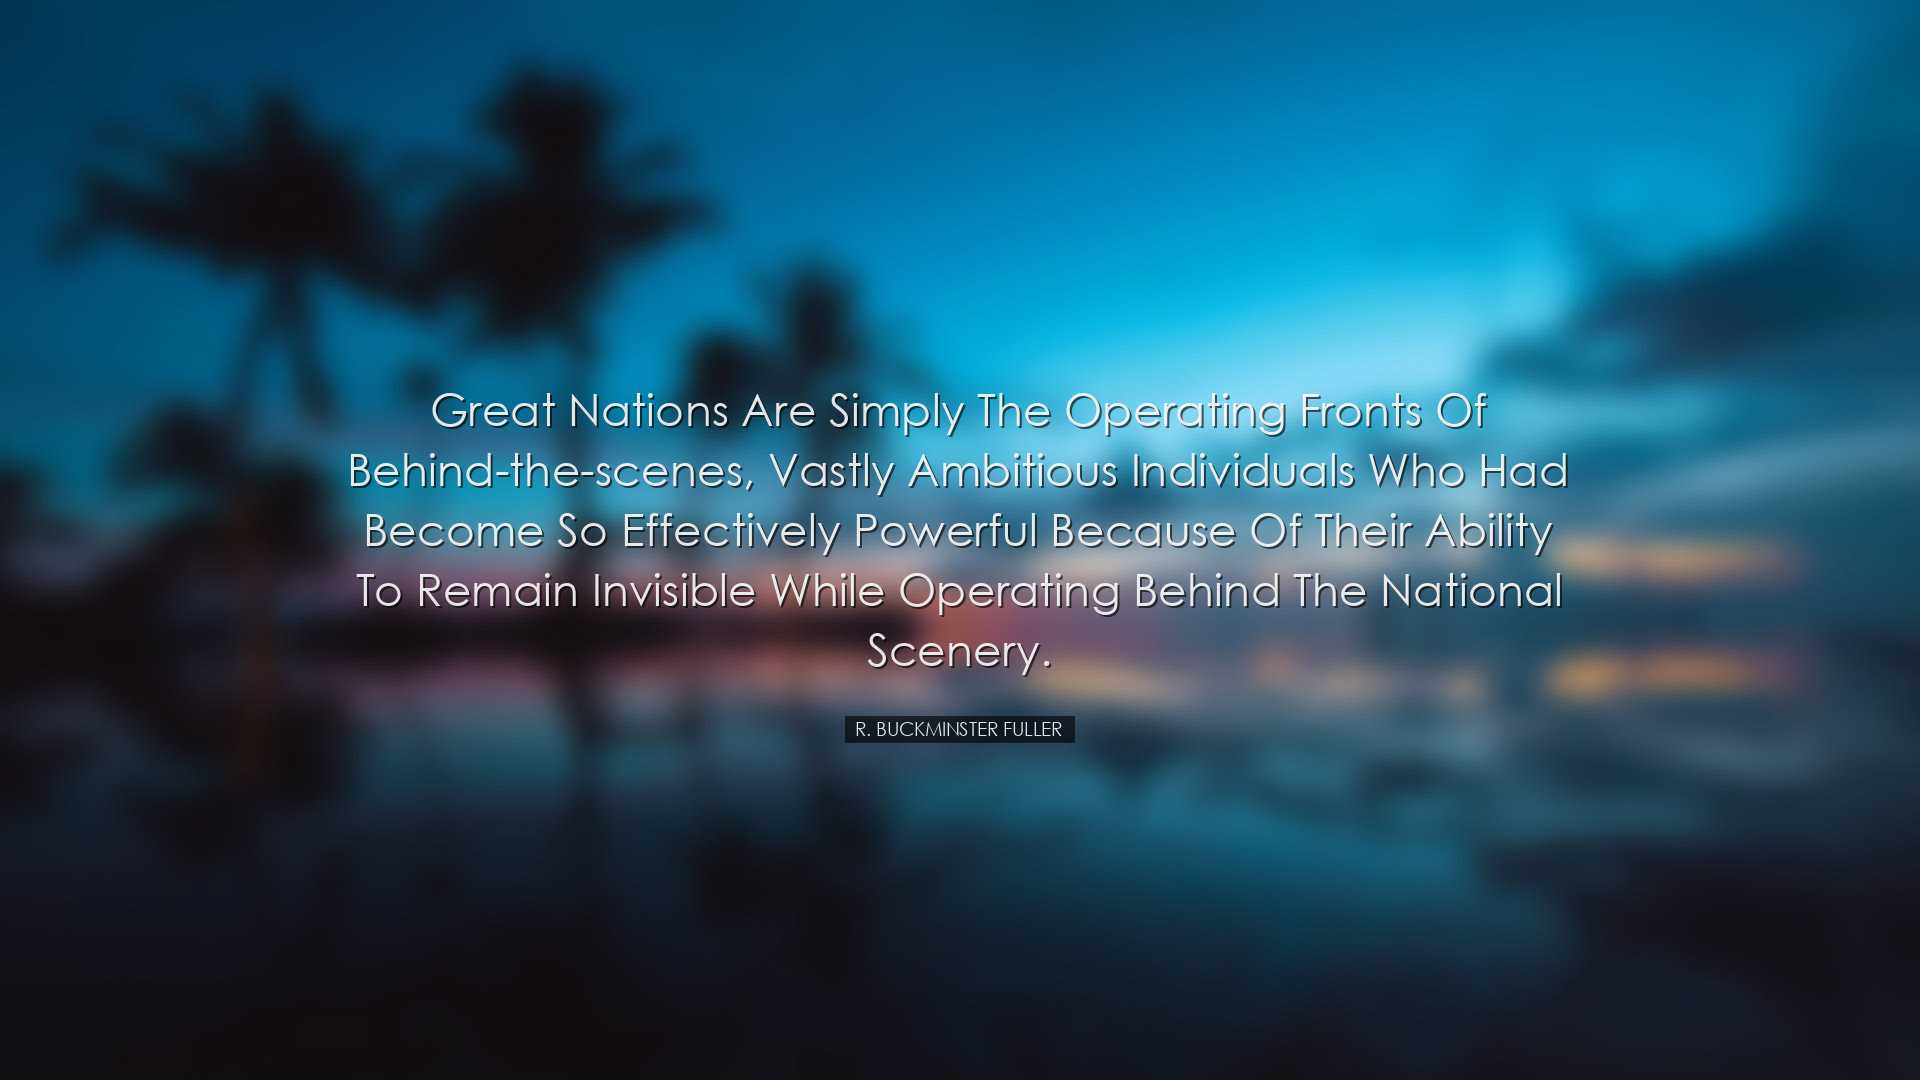 Great nations are simply the operating fronts of behind-the-scenes